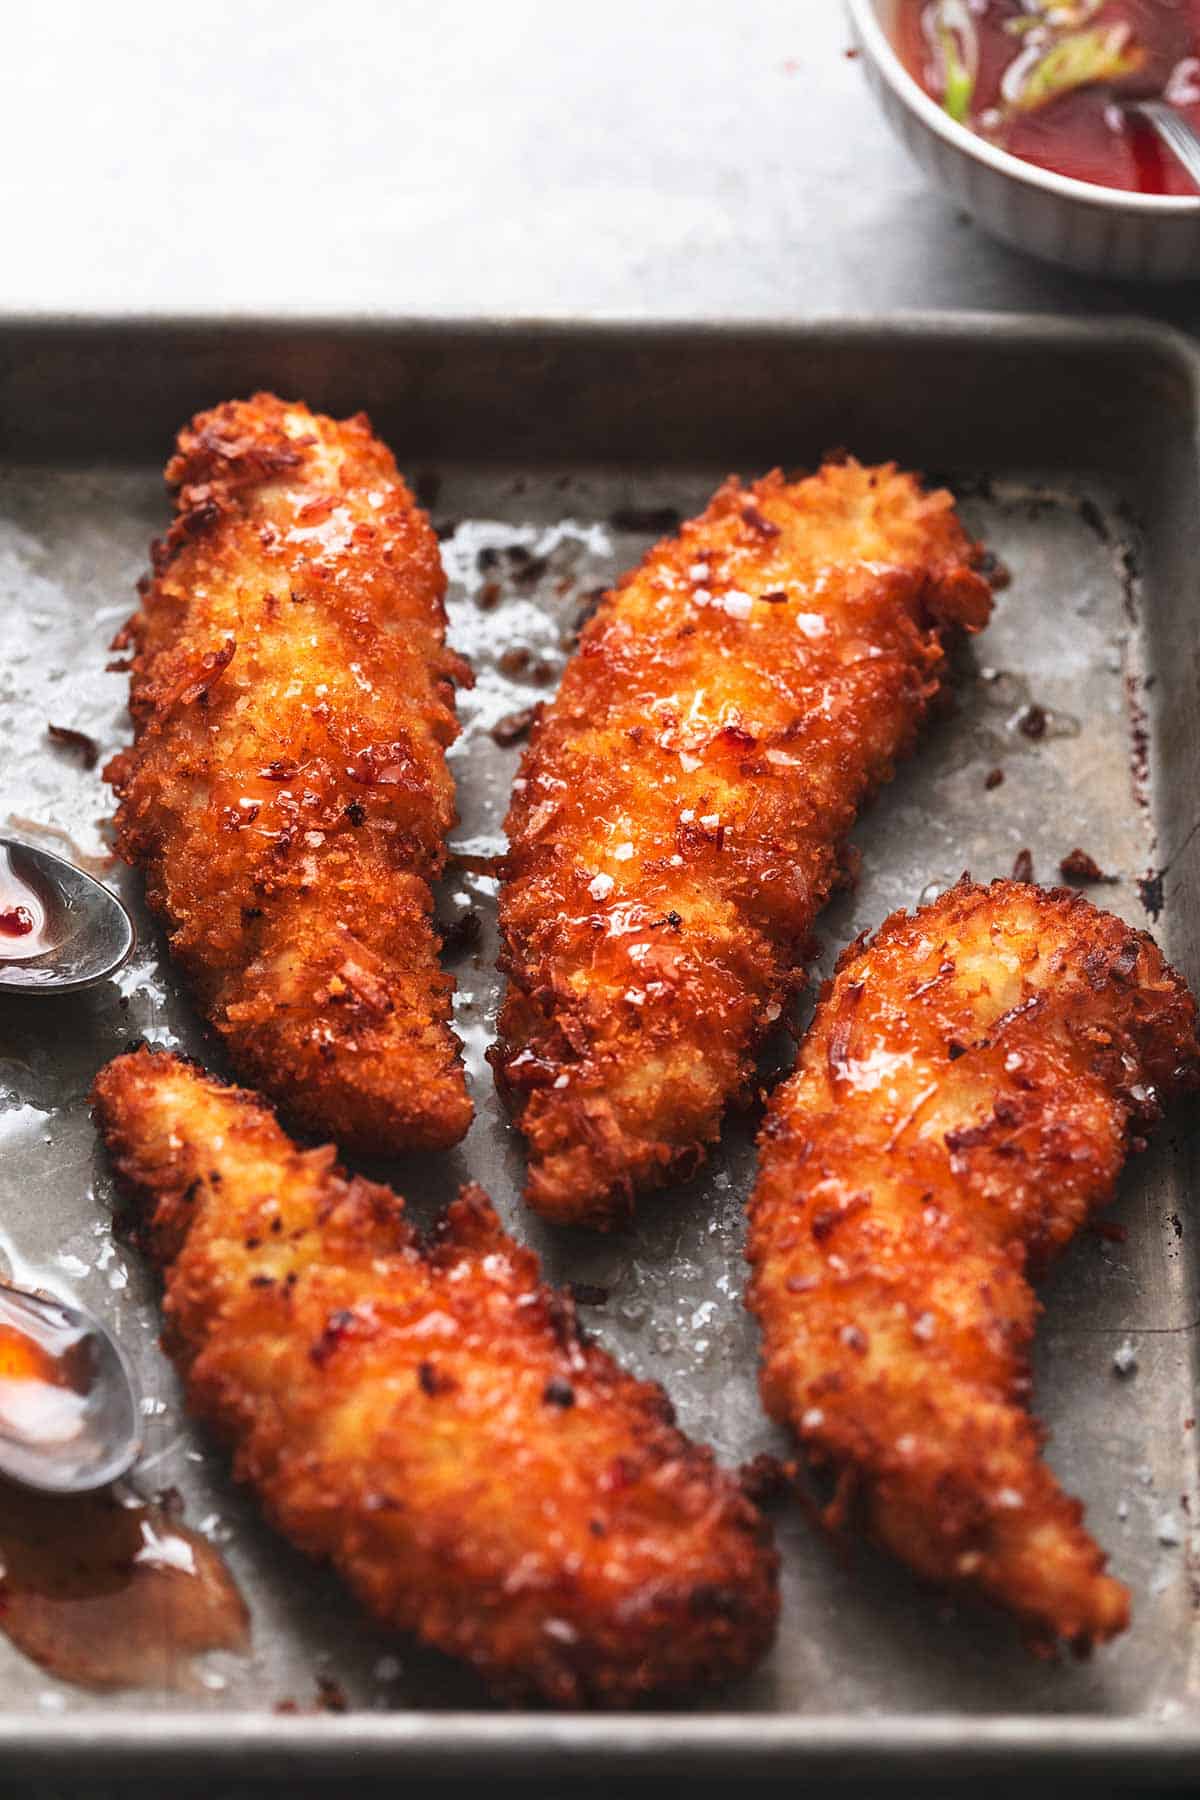 Fried chicken breasts on a baking sheet with sauce.